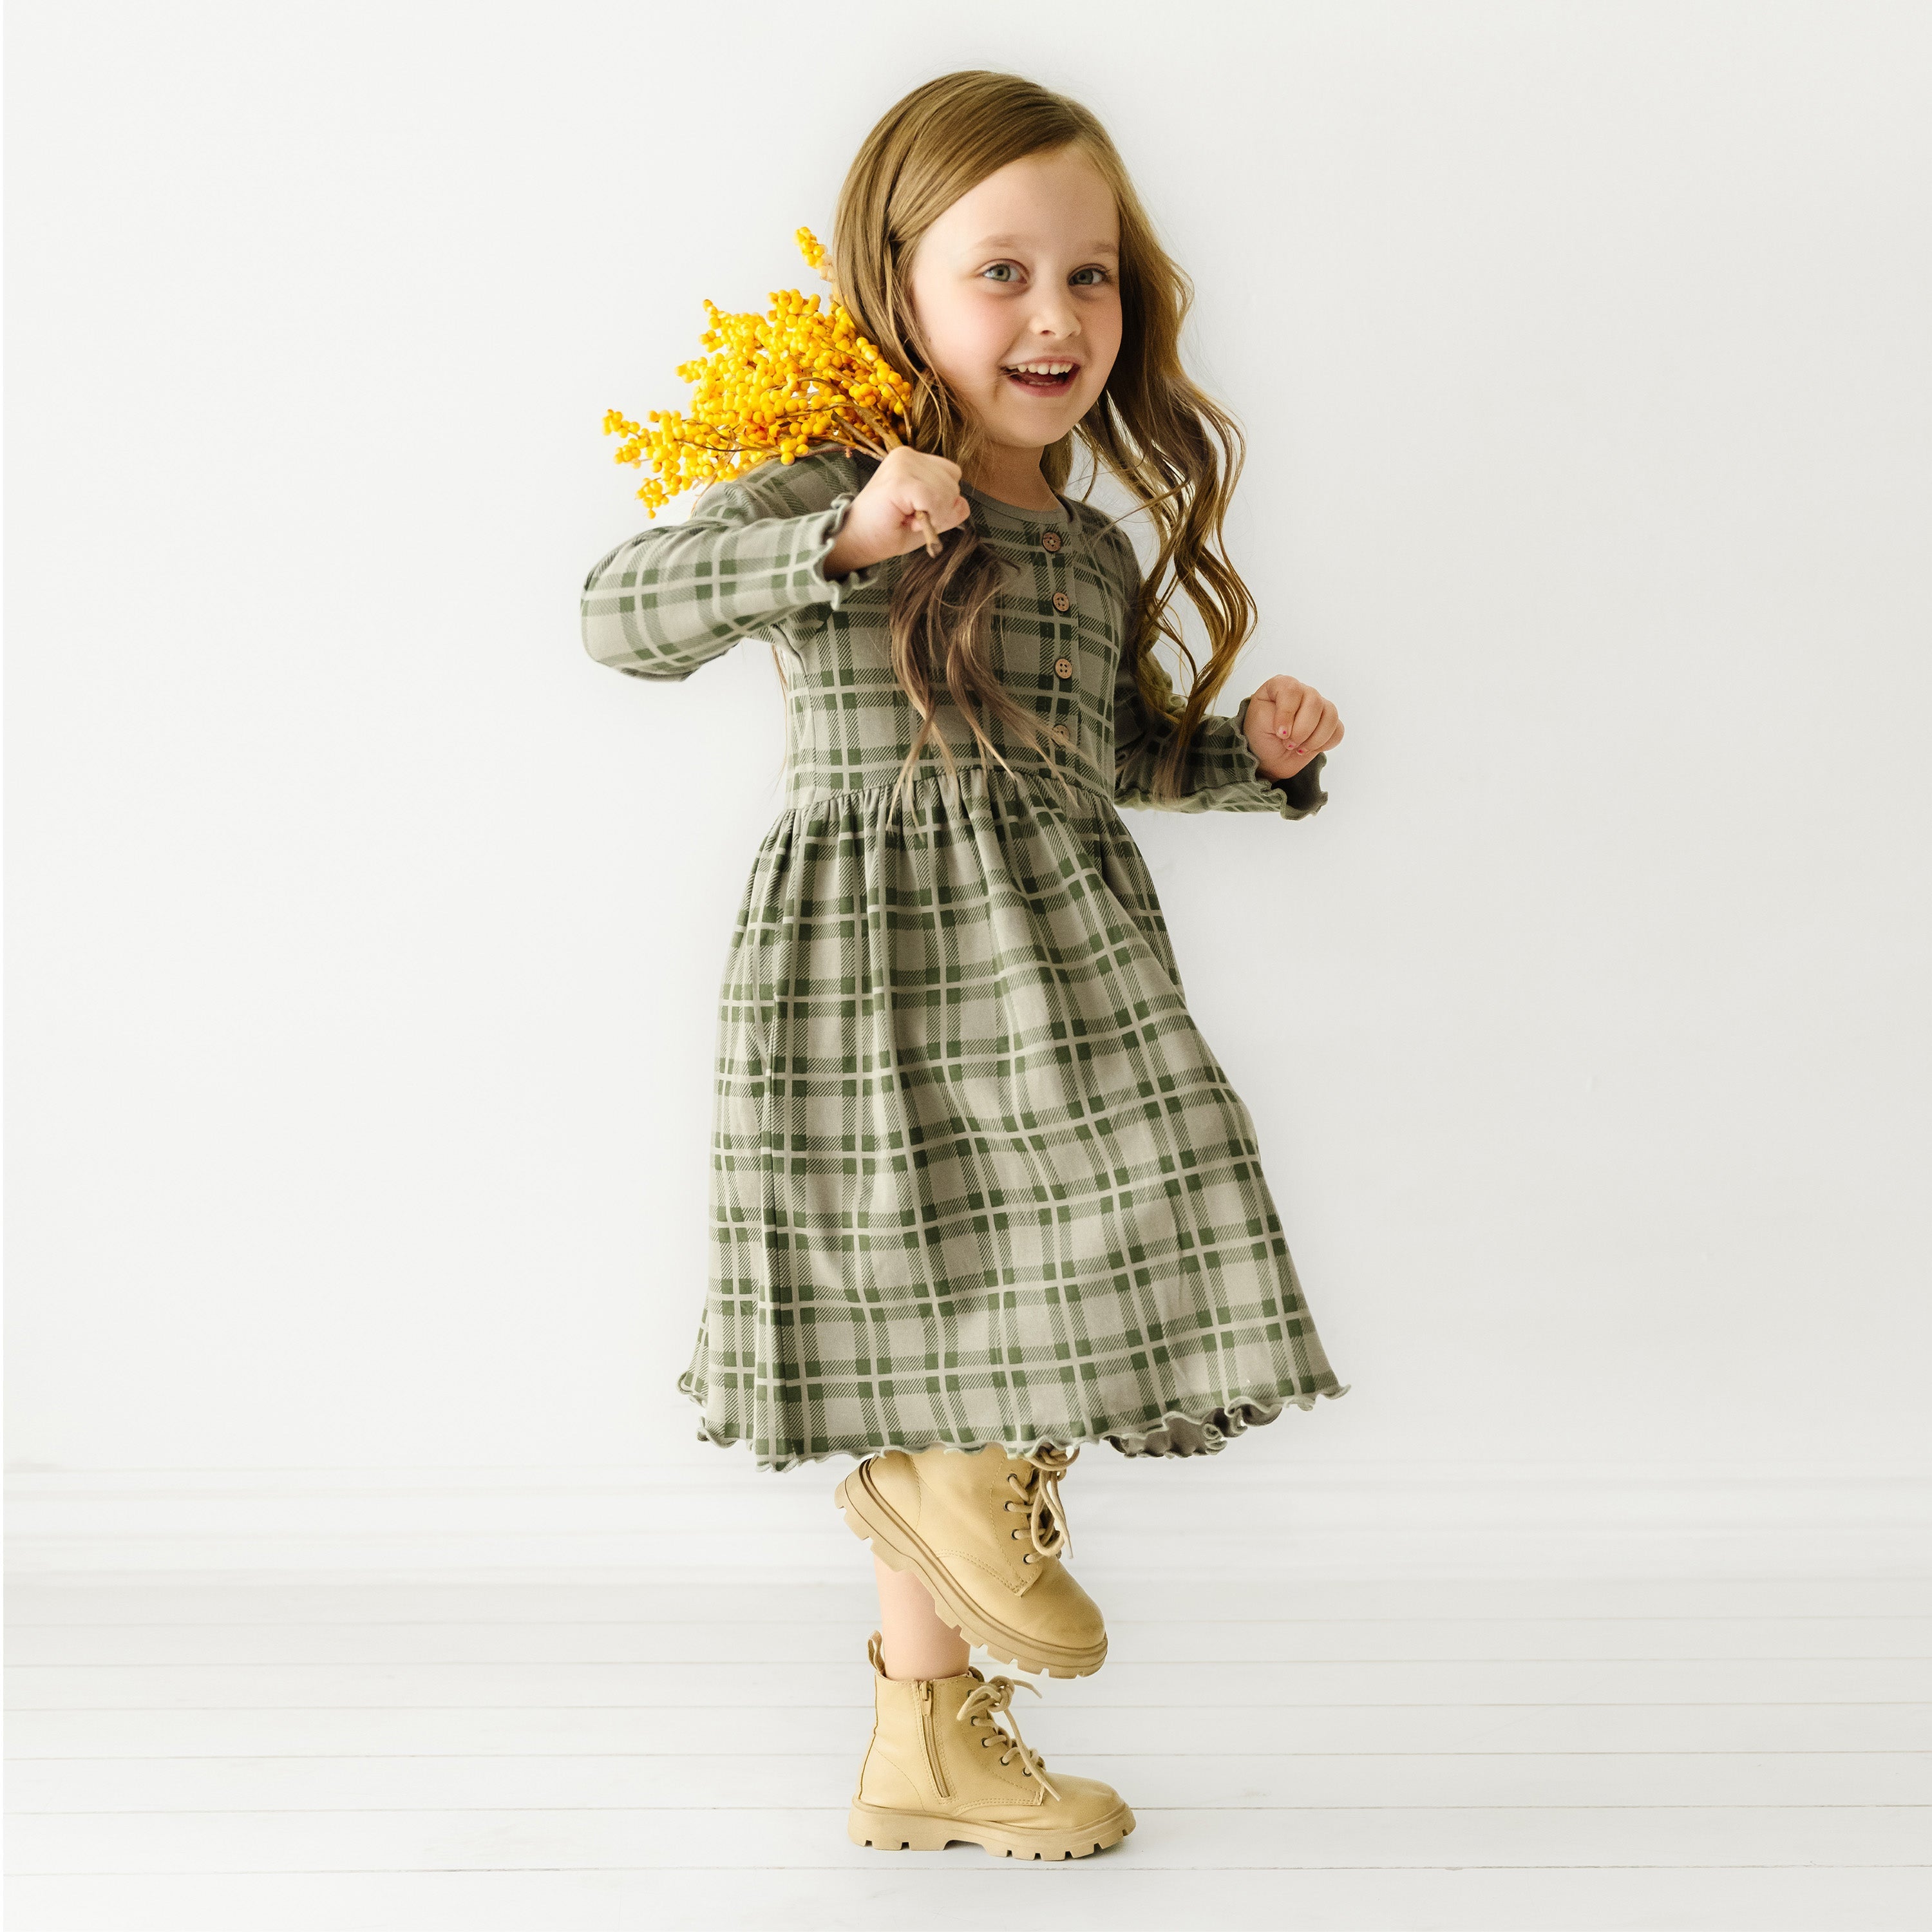 A young girl with long hair in a green plaid Organic Baby dress holds yellow flowers, smiling and appearing to run or jump against a plain white background.